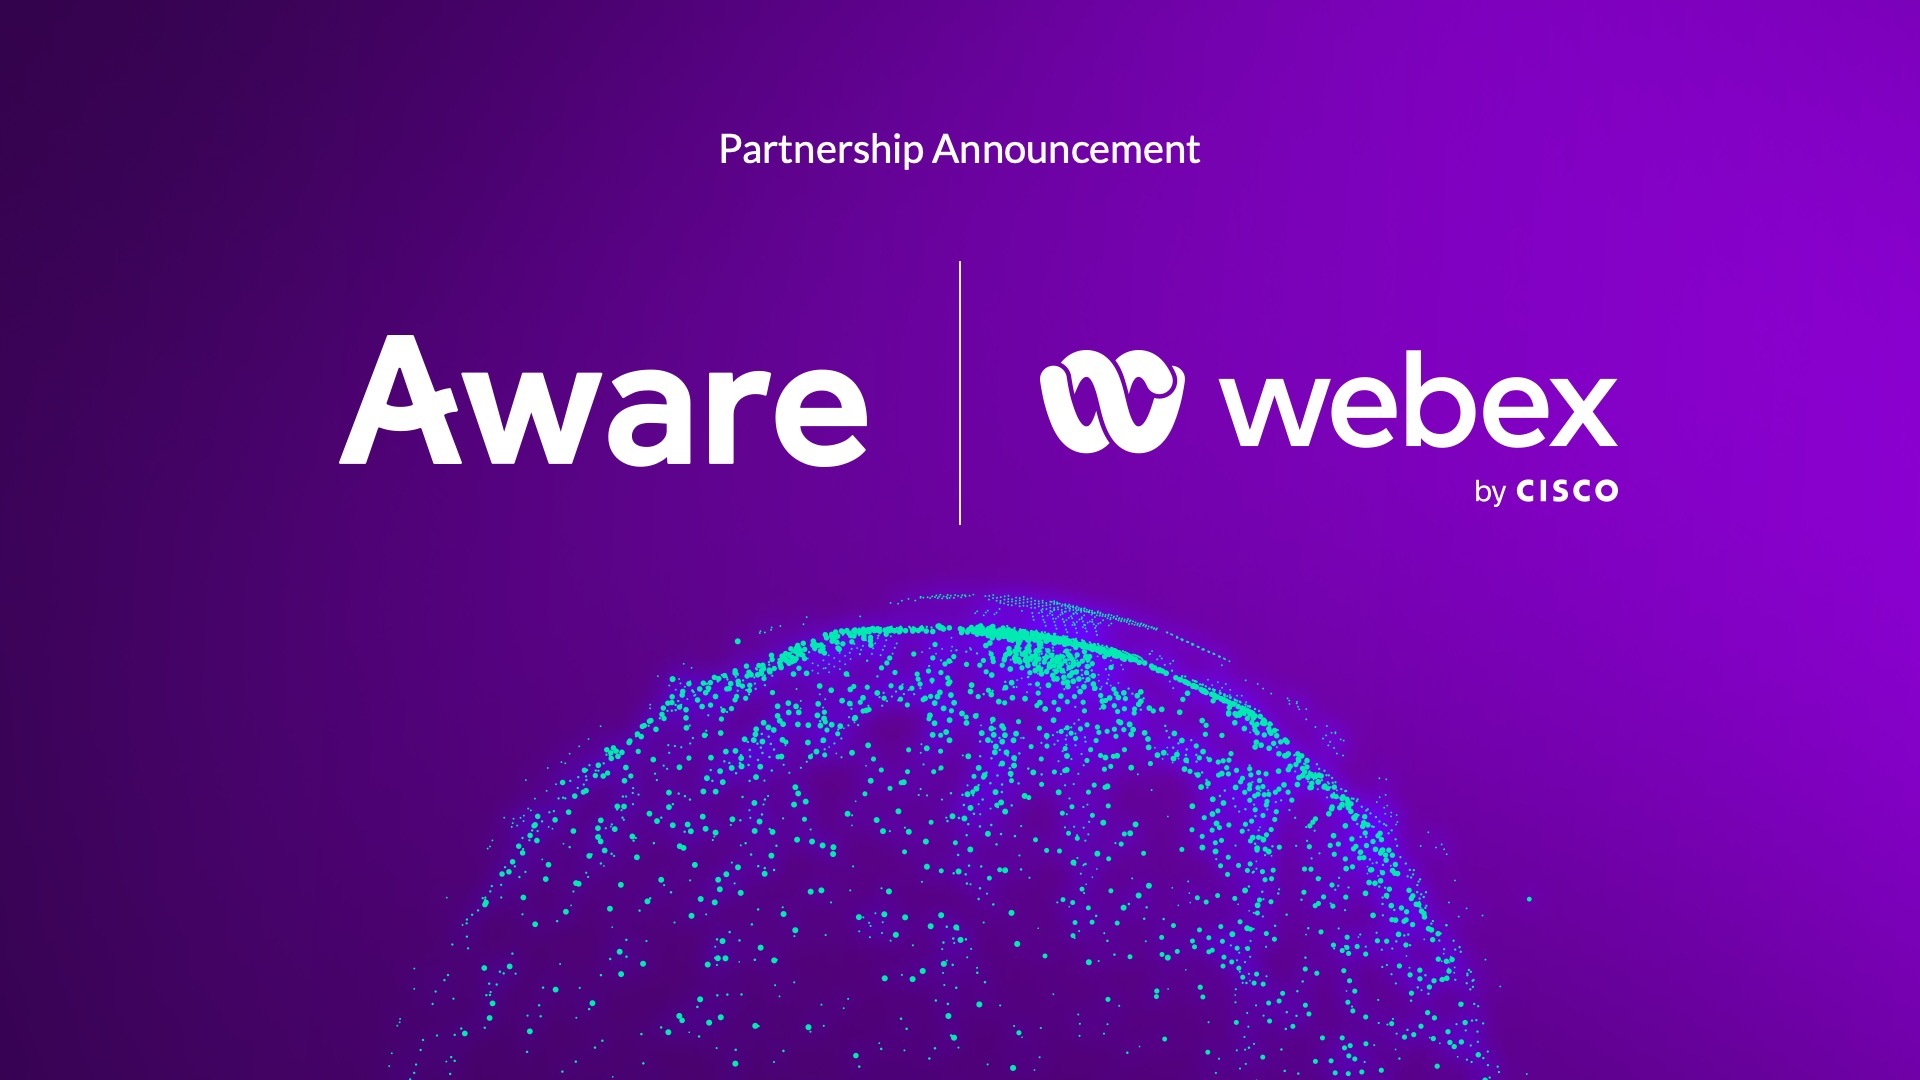 Aware Delivers AI-Powered Insights for Secure Enterprises with Webex by Cisco